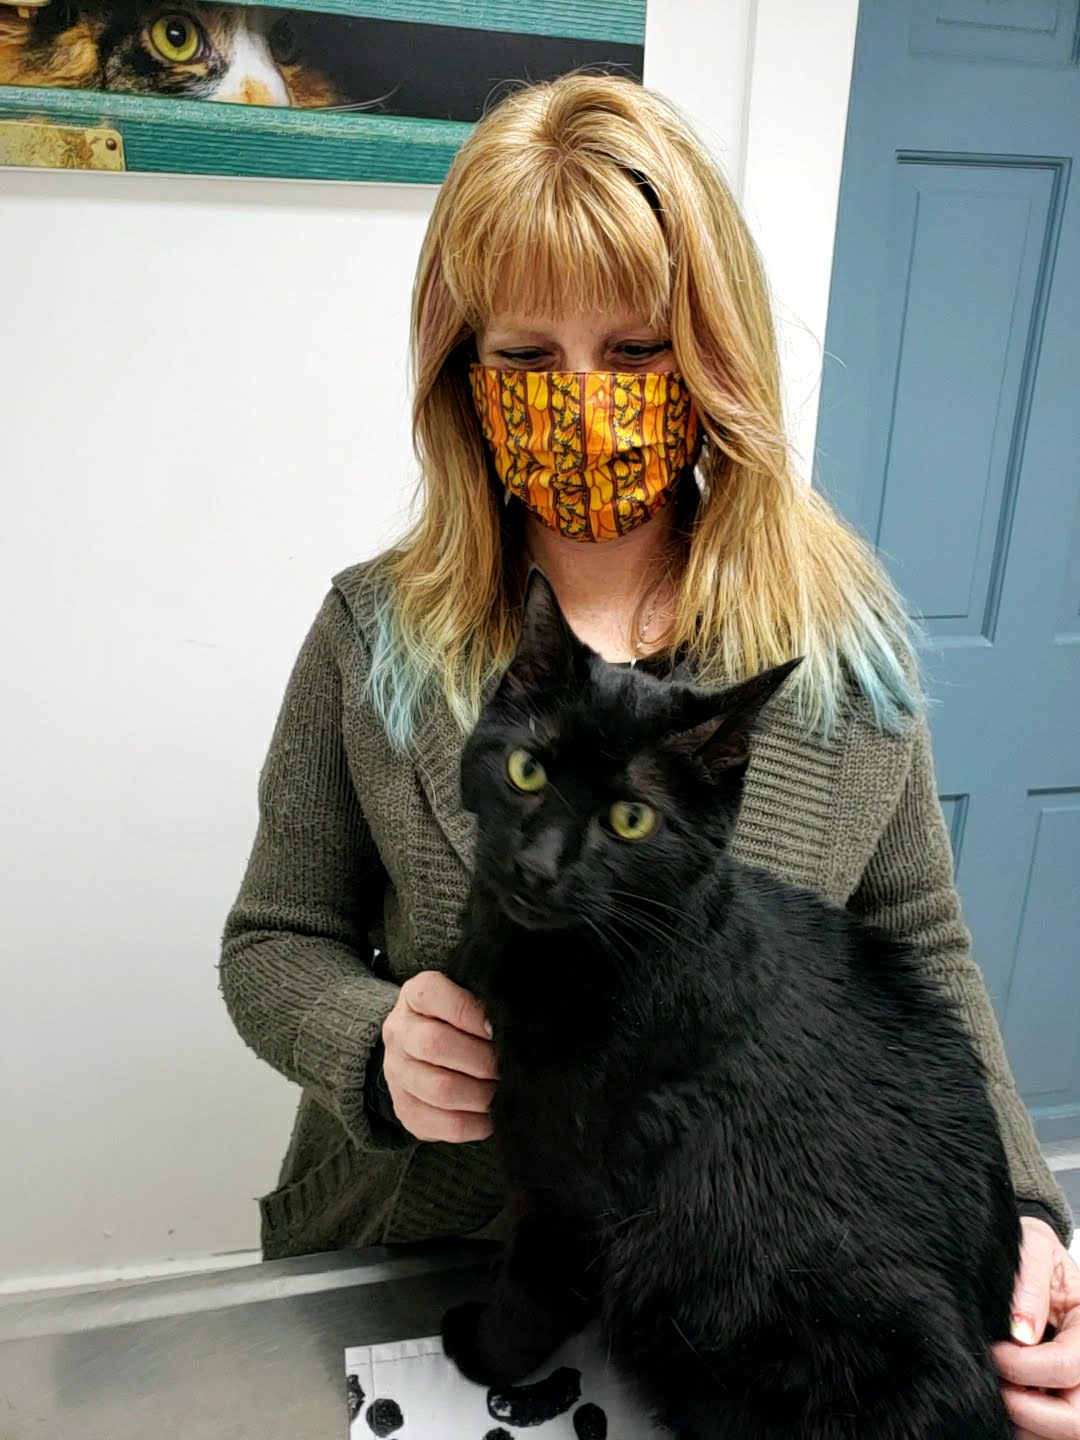 A person wearing a mask and holding a cat